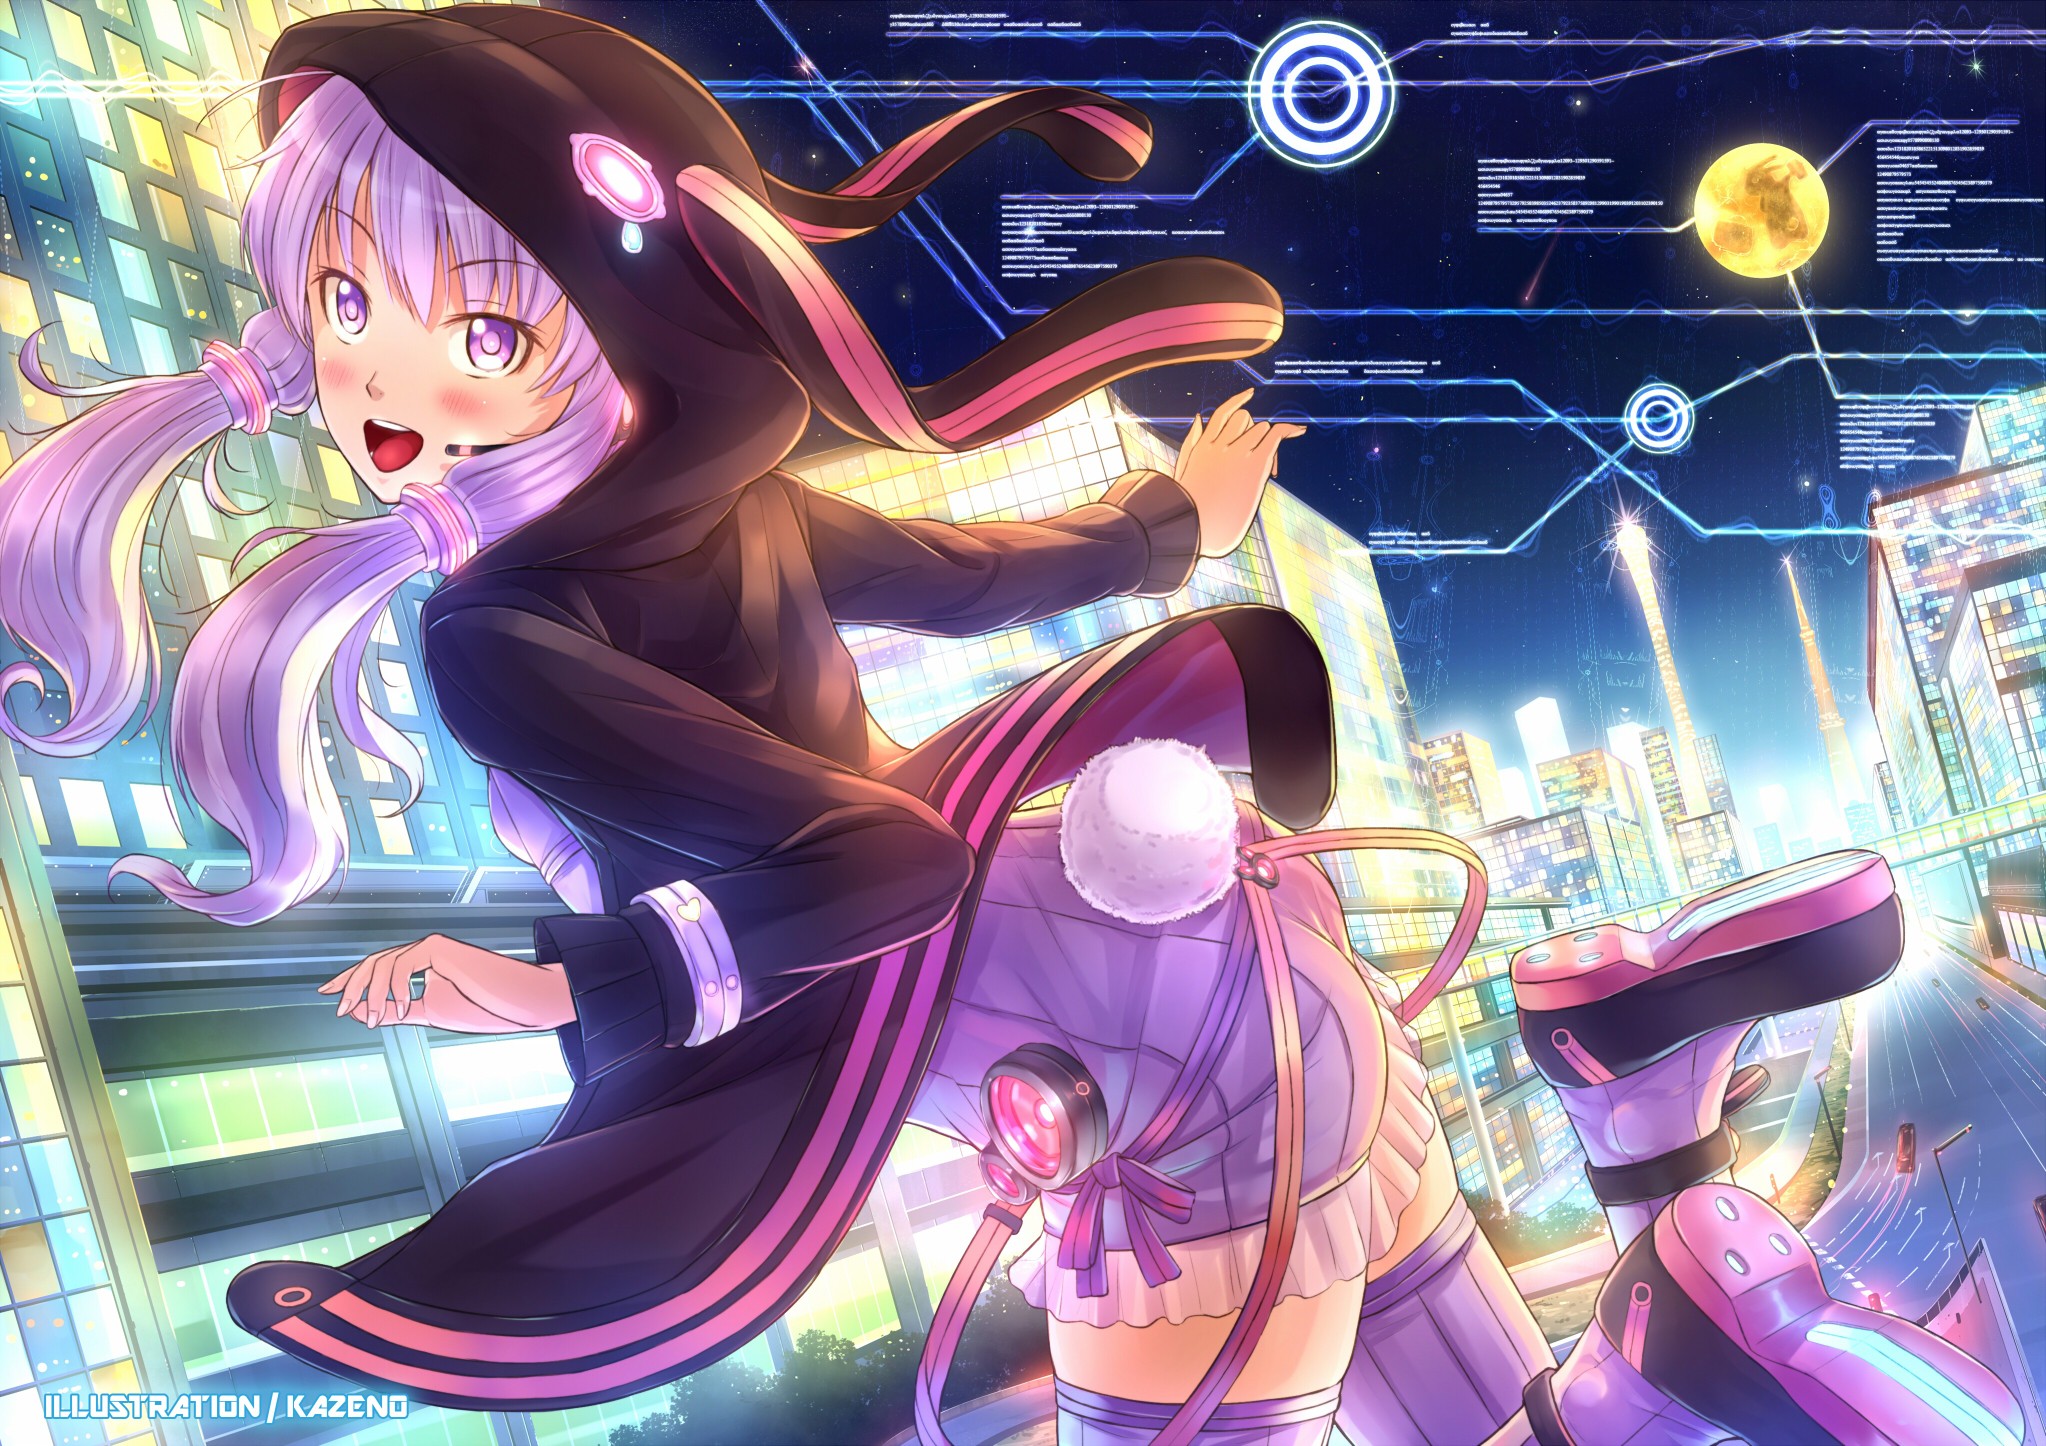 tails, Cityscapes, Vocaloid, Night, Stars, Texts, Moon, Headset, Jumping, Buildings, Bunny, Girls, Purple, Hair, Animal, Ears, Thigh, Highs, Twintails, Smiling, Blush, Hoodie, Open, Mouth, Bunny, Ears, Purple, Dr Wallpaper